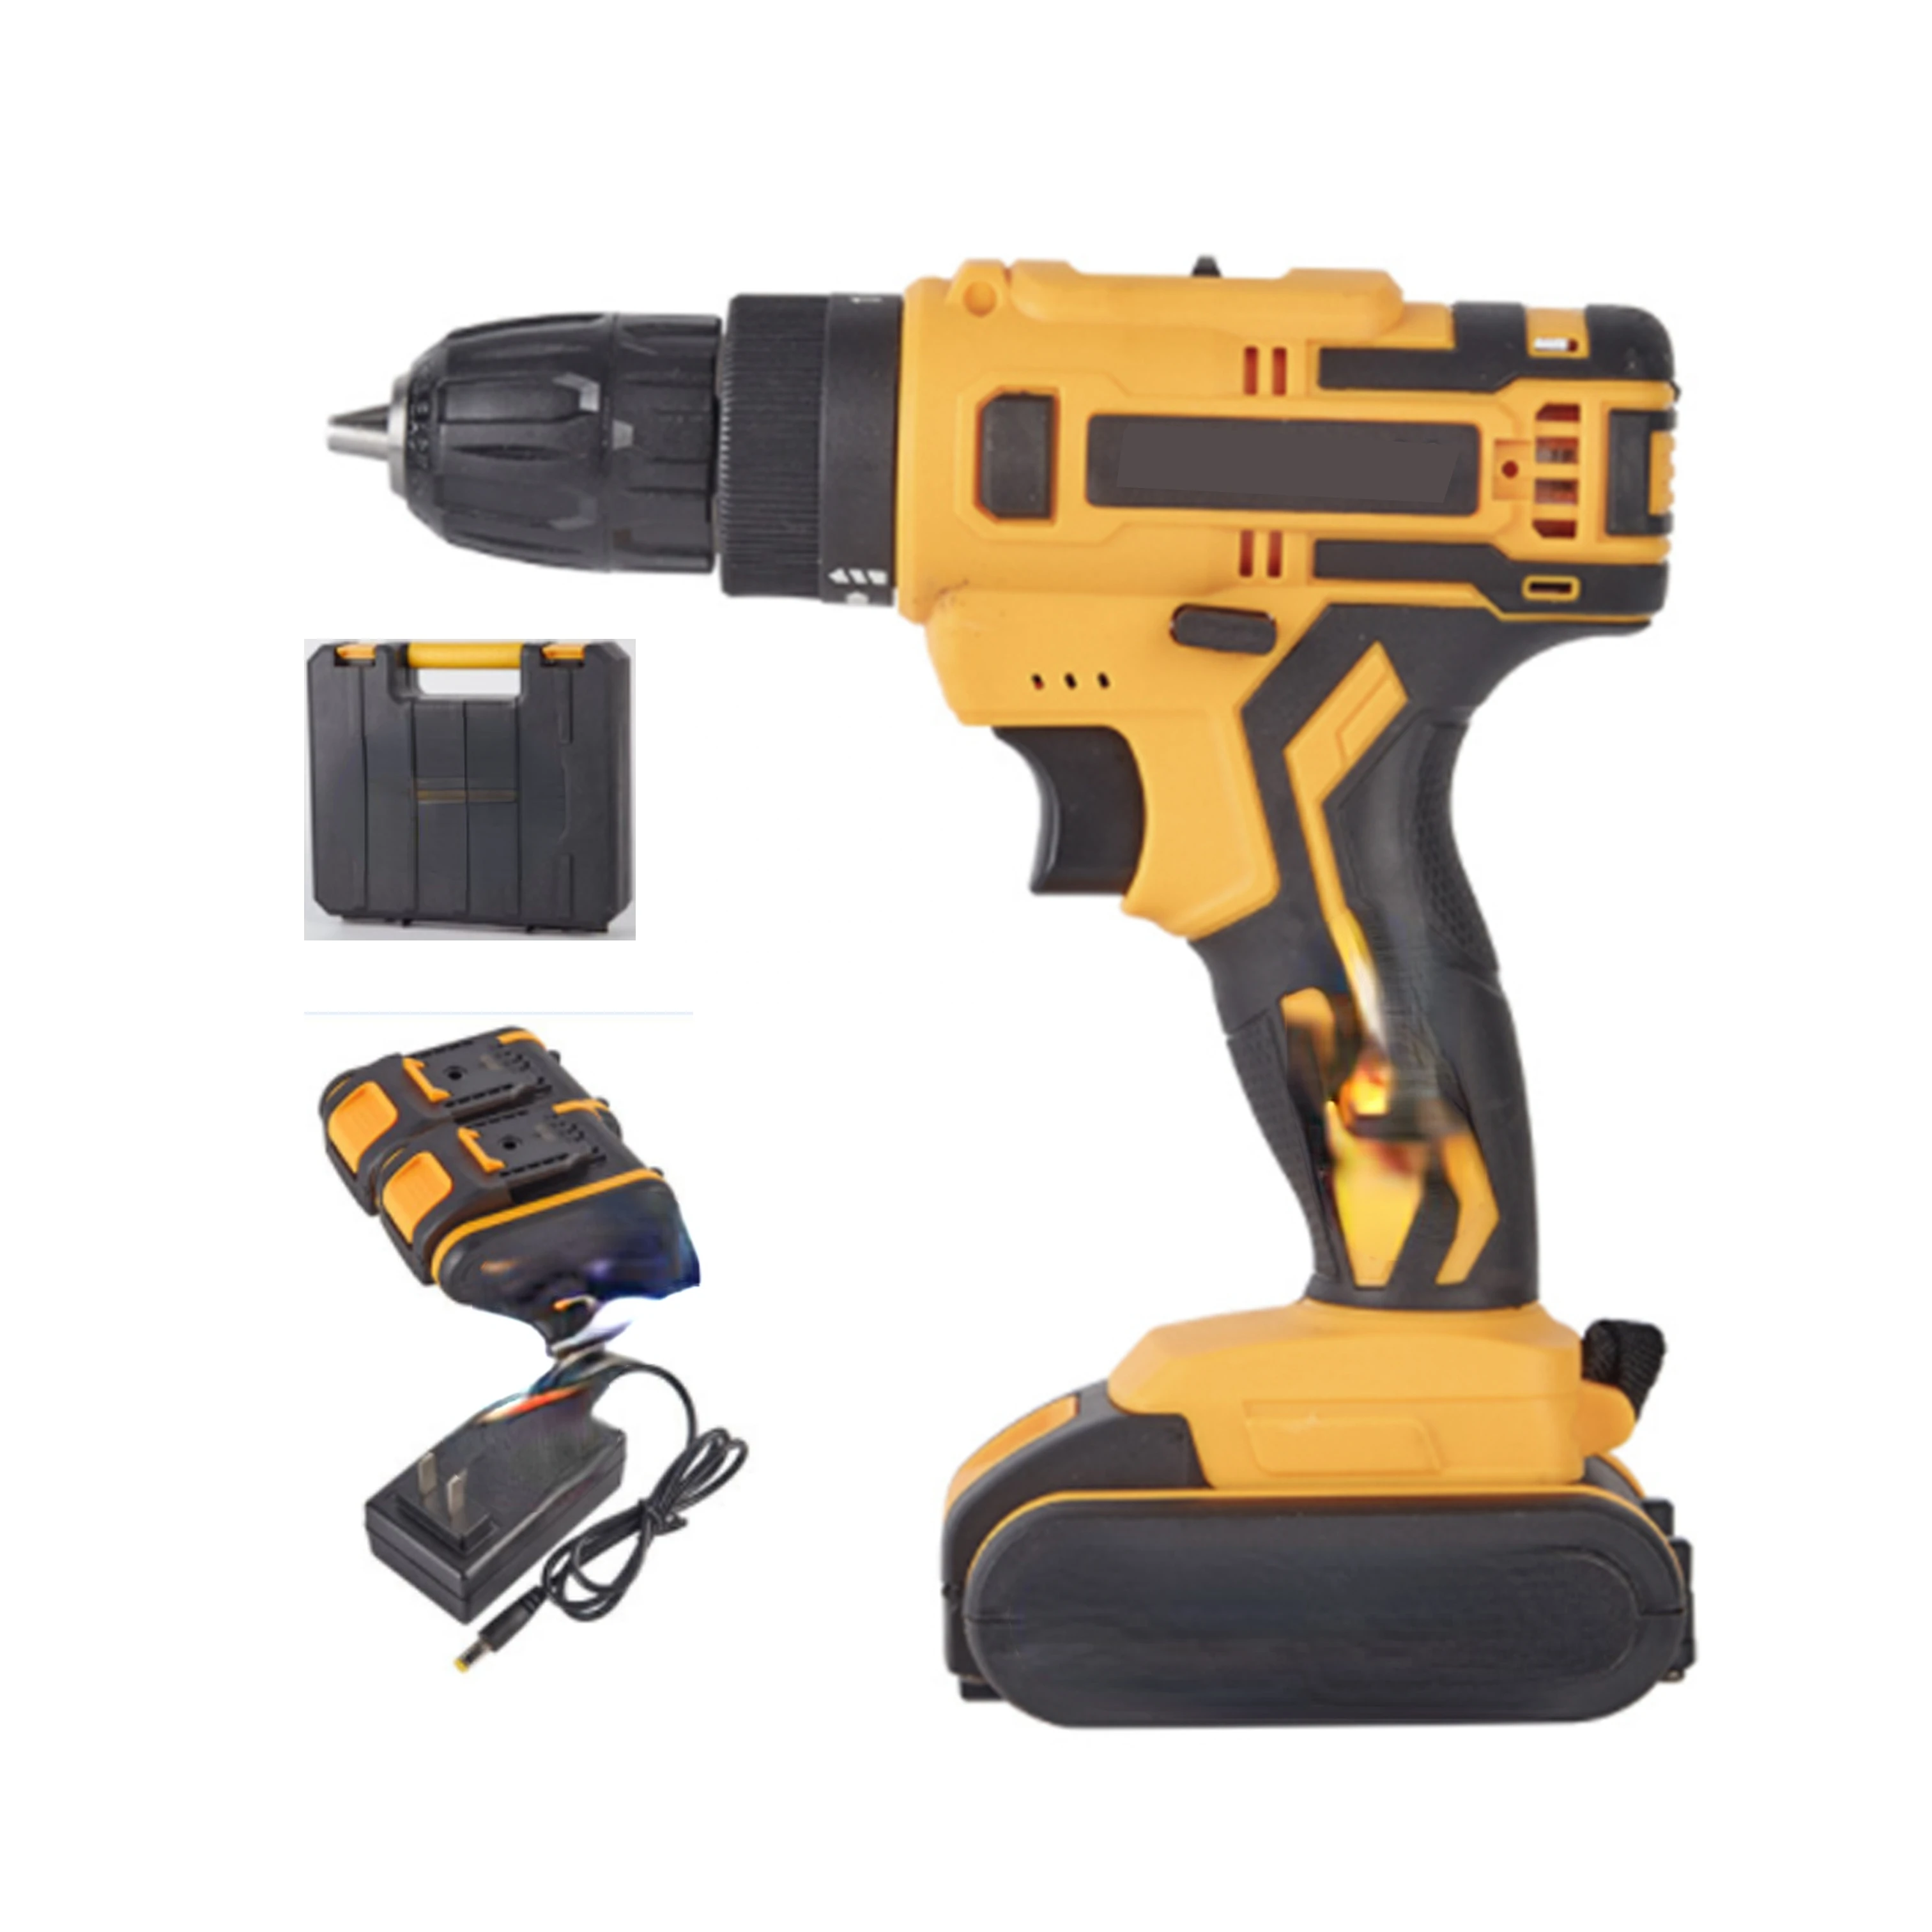 21v-the-best-battery-cordless-electric-drill-power-drilling-machines-brushless-drill-tools-combo-set